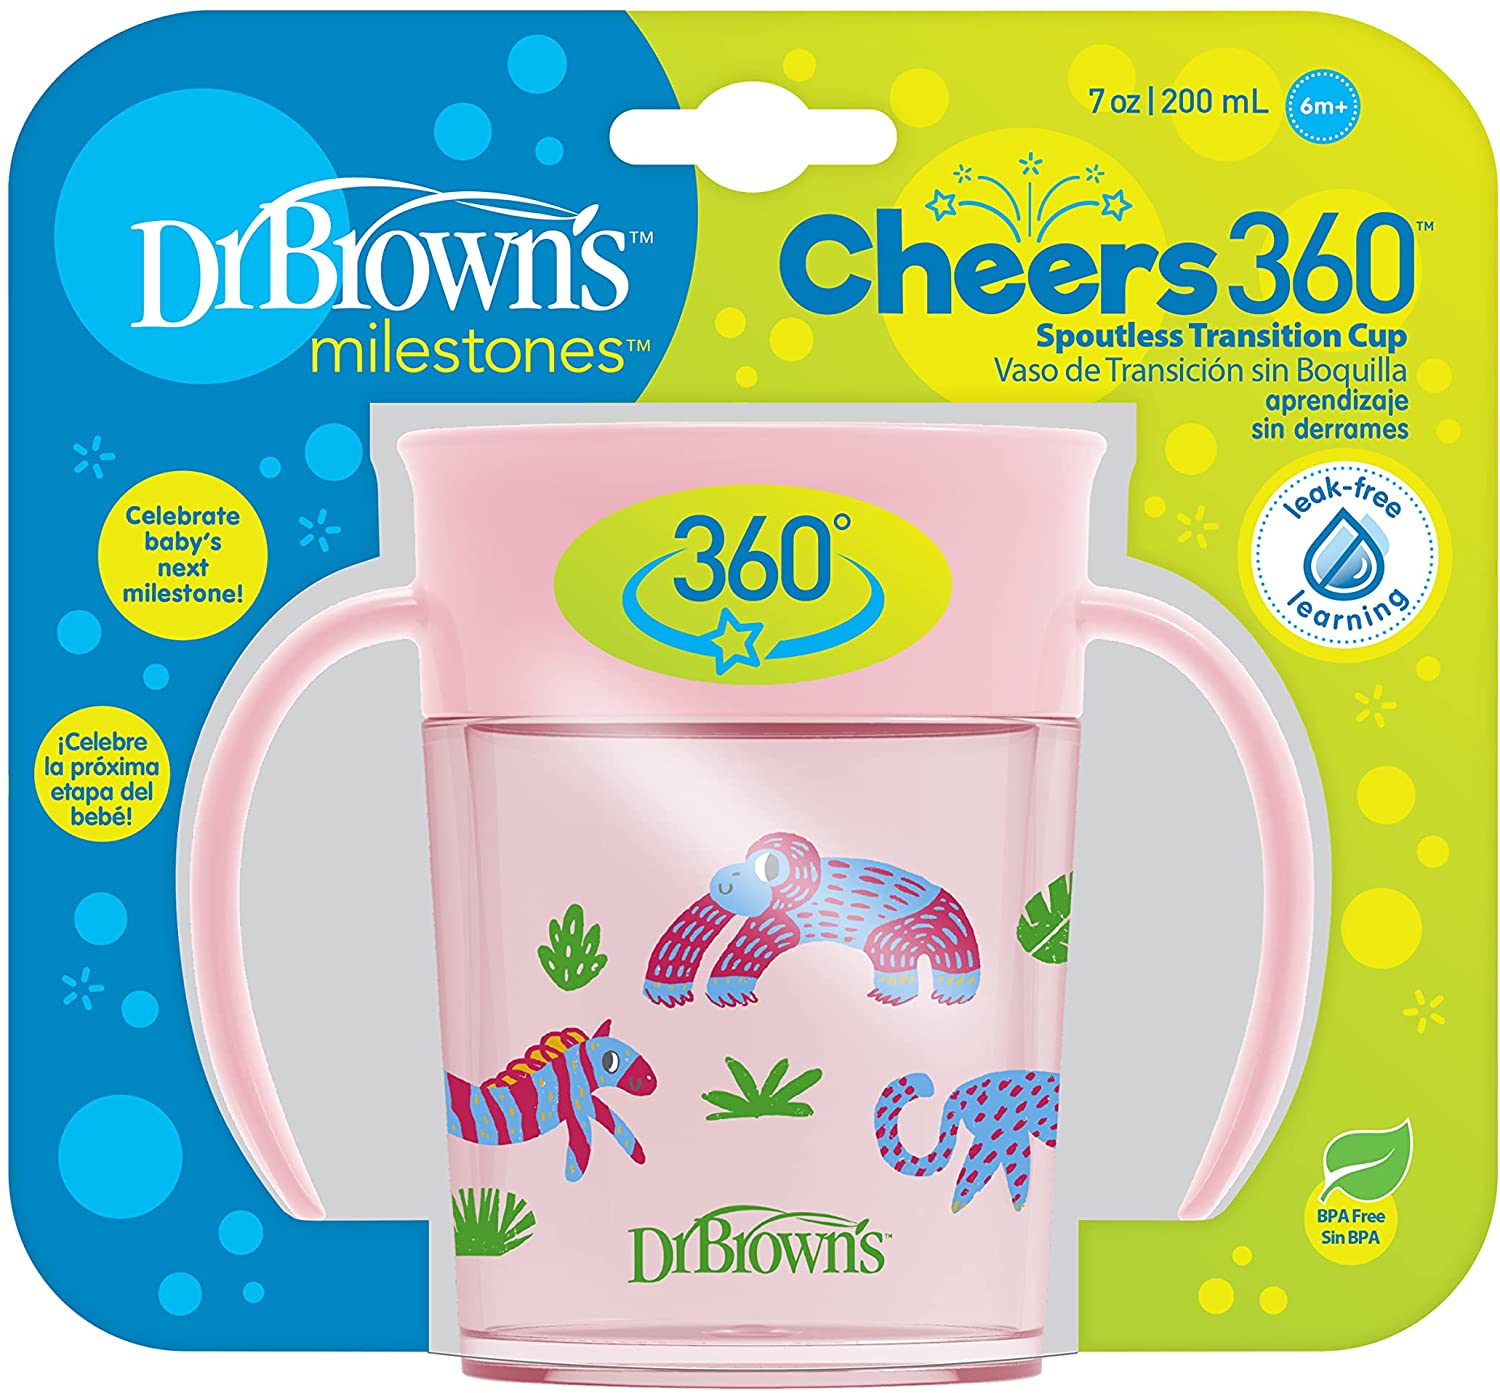 Dr. Brown's Smooth Wall Cheers360 Cup w/ Handles, 7 oz/200mL